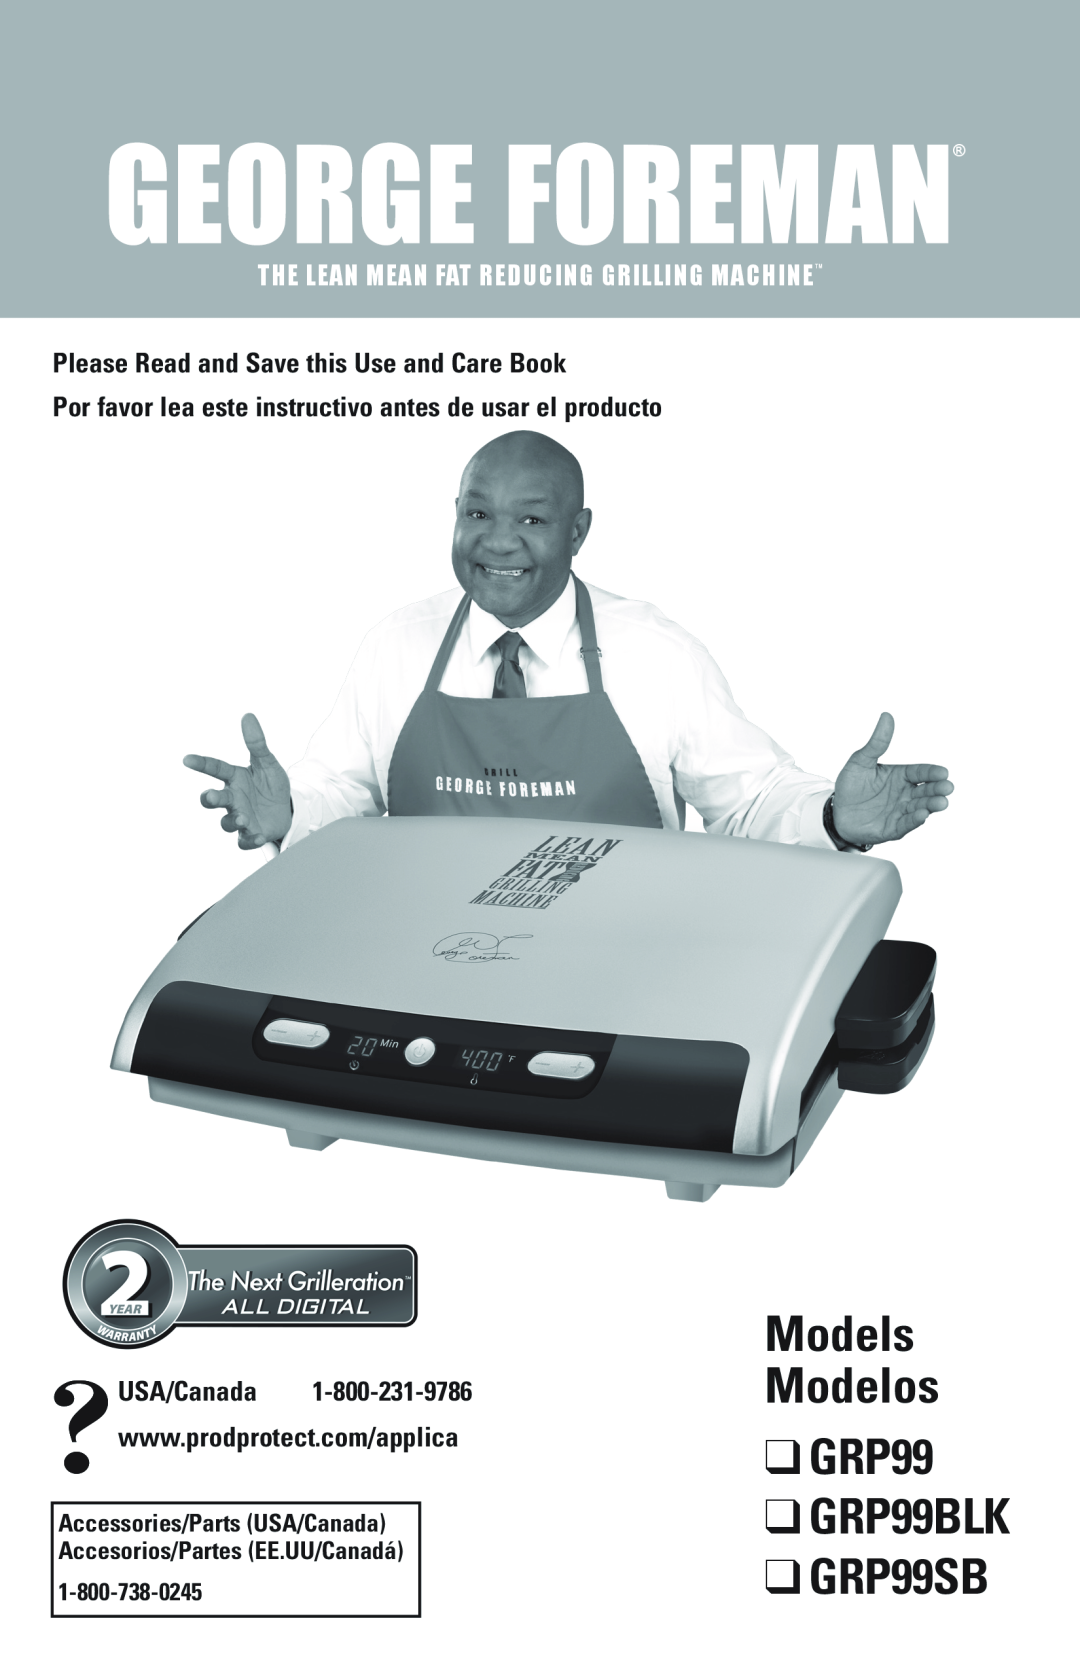 George Foreman manual Models Modelos GRP99 GRP99BLK GRP99SB, The Lean Mean Fat Reducing Grilling Machinetm 